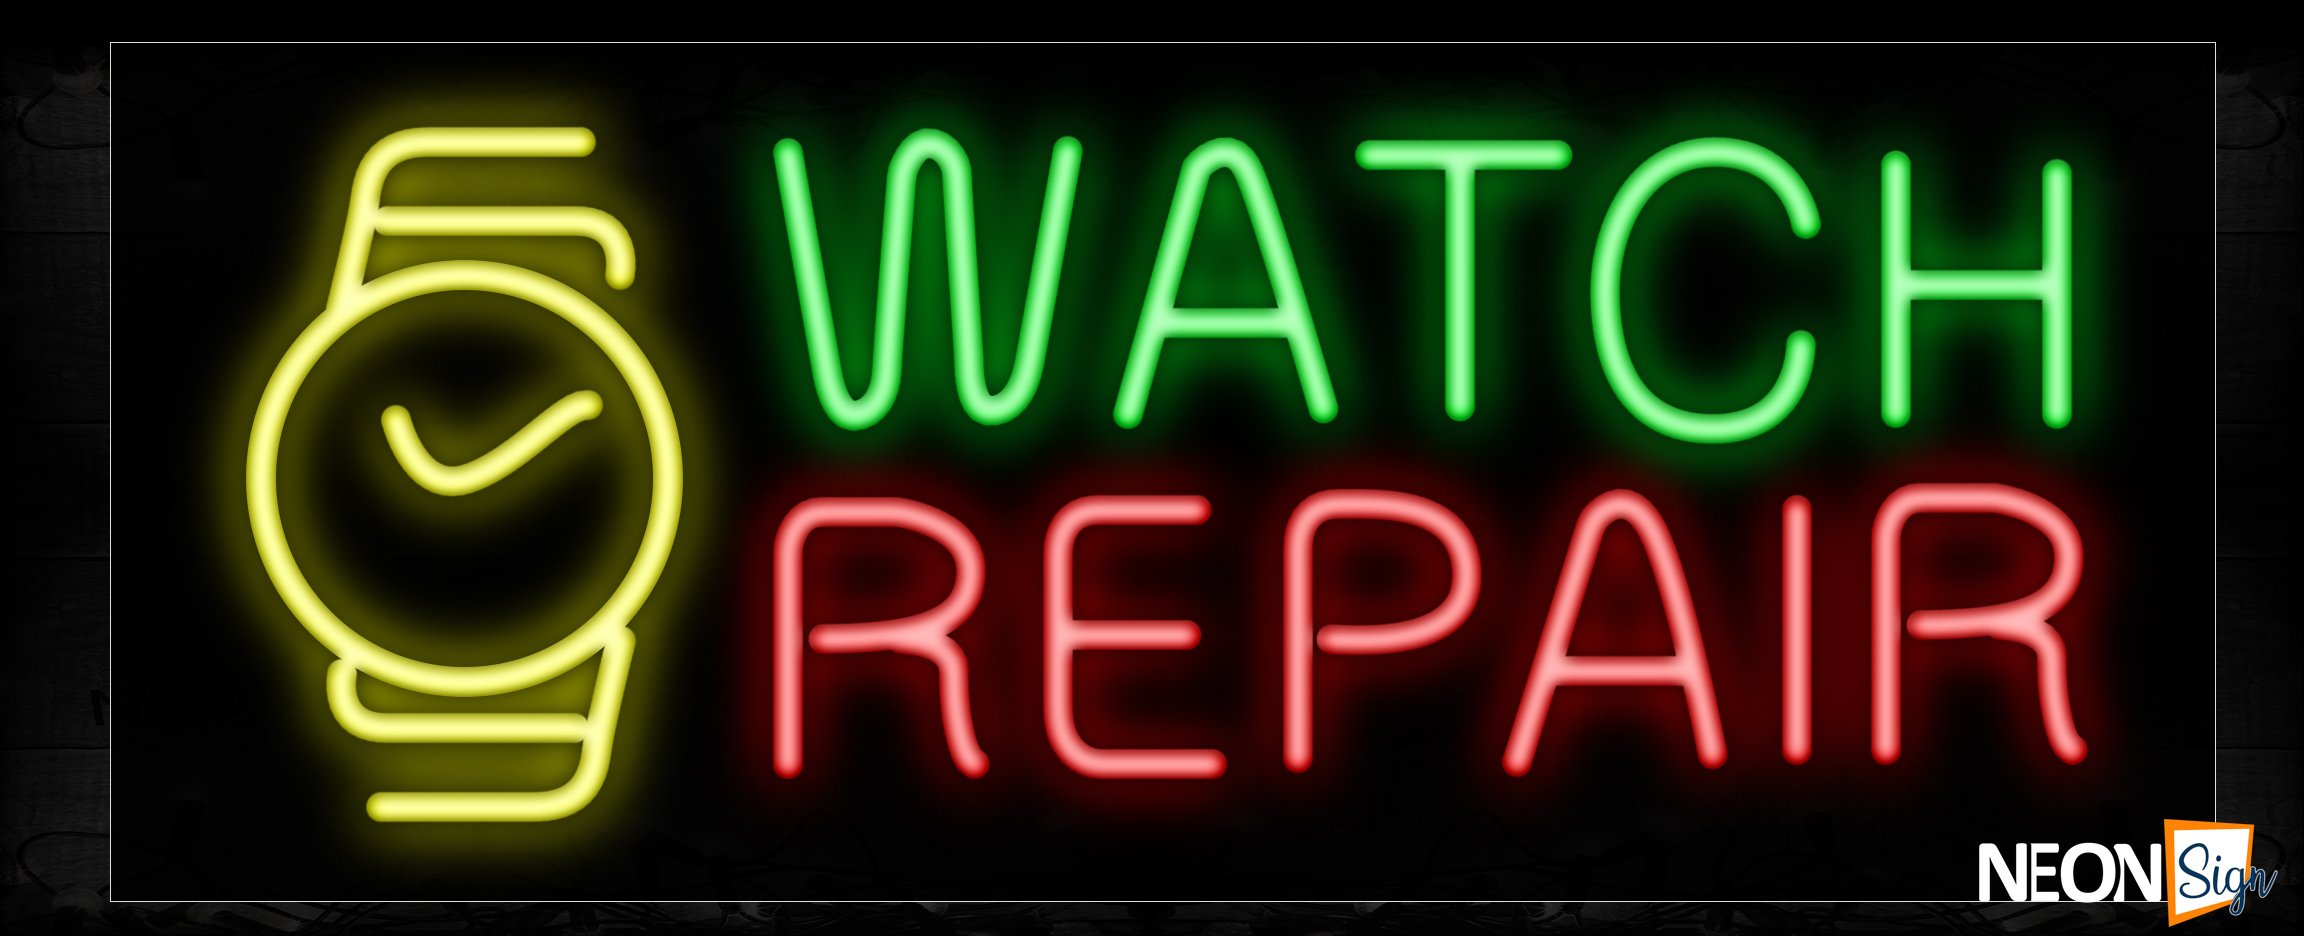 Image of 10475 Watch Repair Traditional Neon_13x32 Black Backing